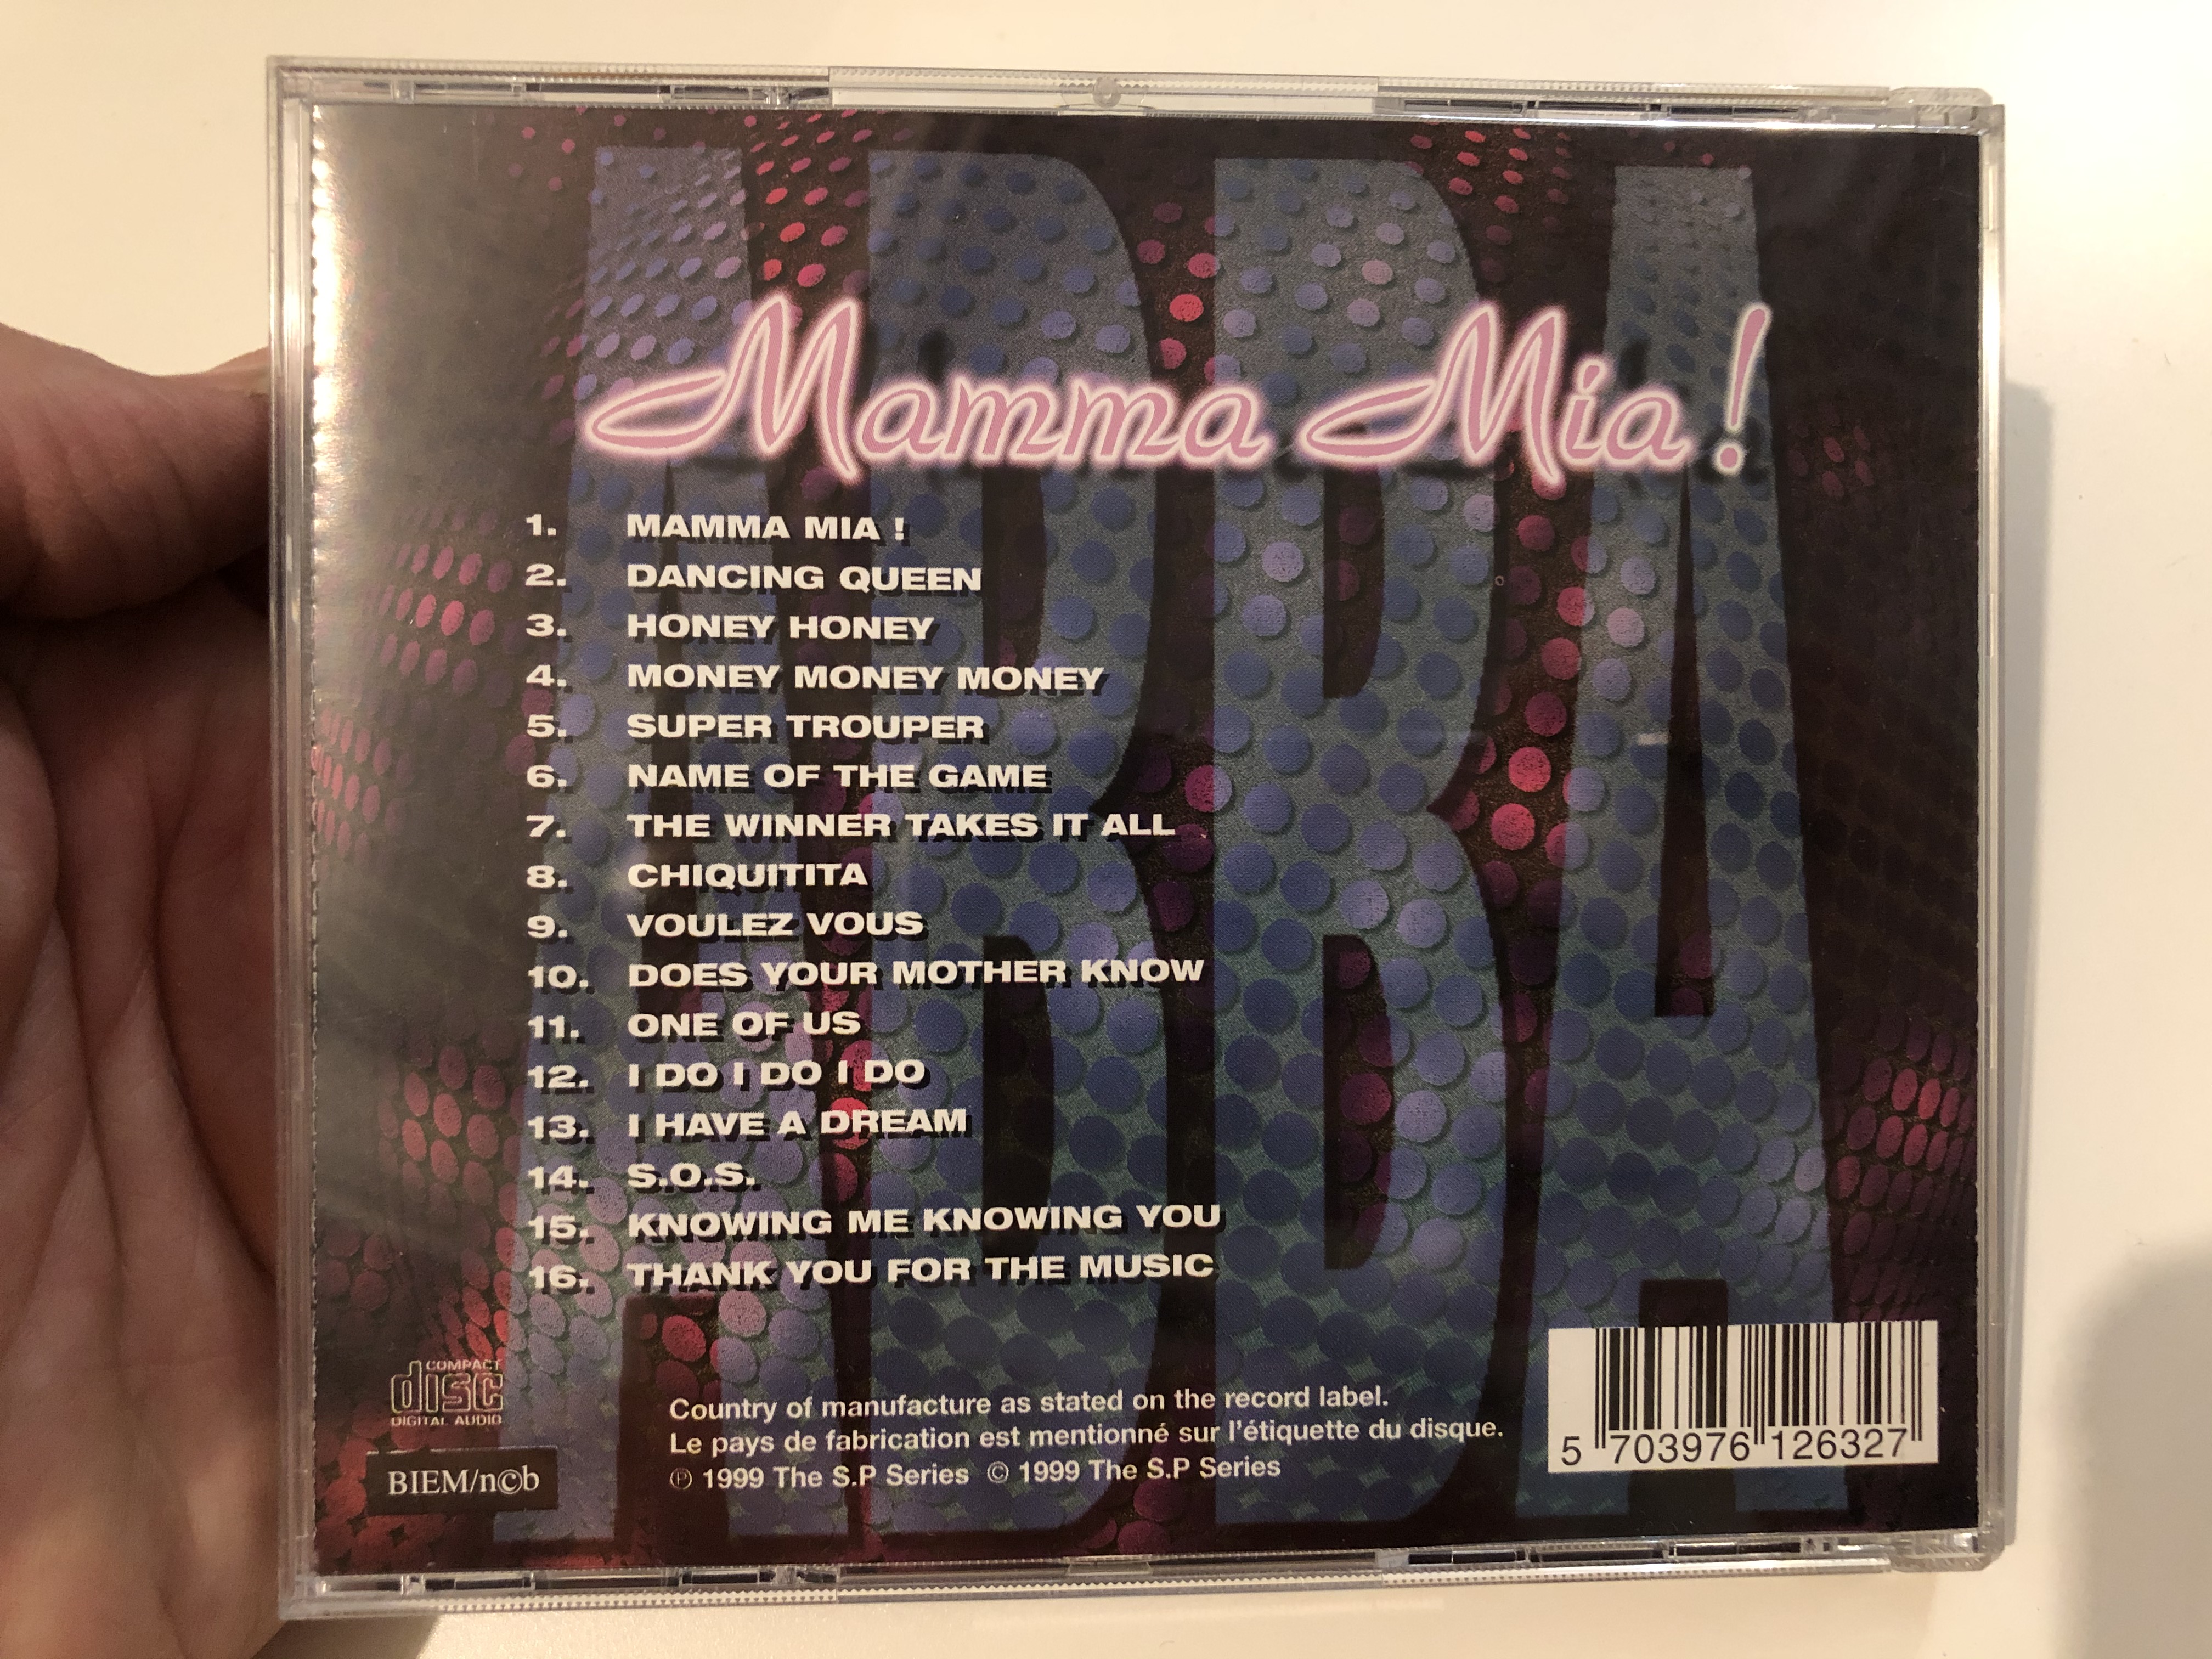 abba-mamma-mia-highlights-from-the-musical-based-on-the-songs-of-abba-including-mamma-mia-the-winner-takes-it-all-waterloo-dancing-queen-and-many-more...-s.p.-series-audio-cd-199.jpg